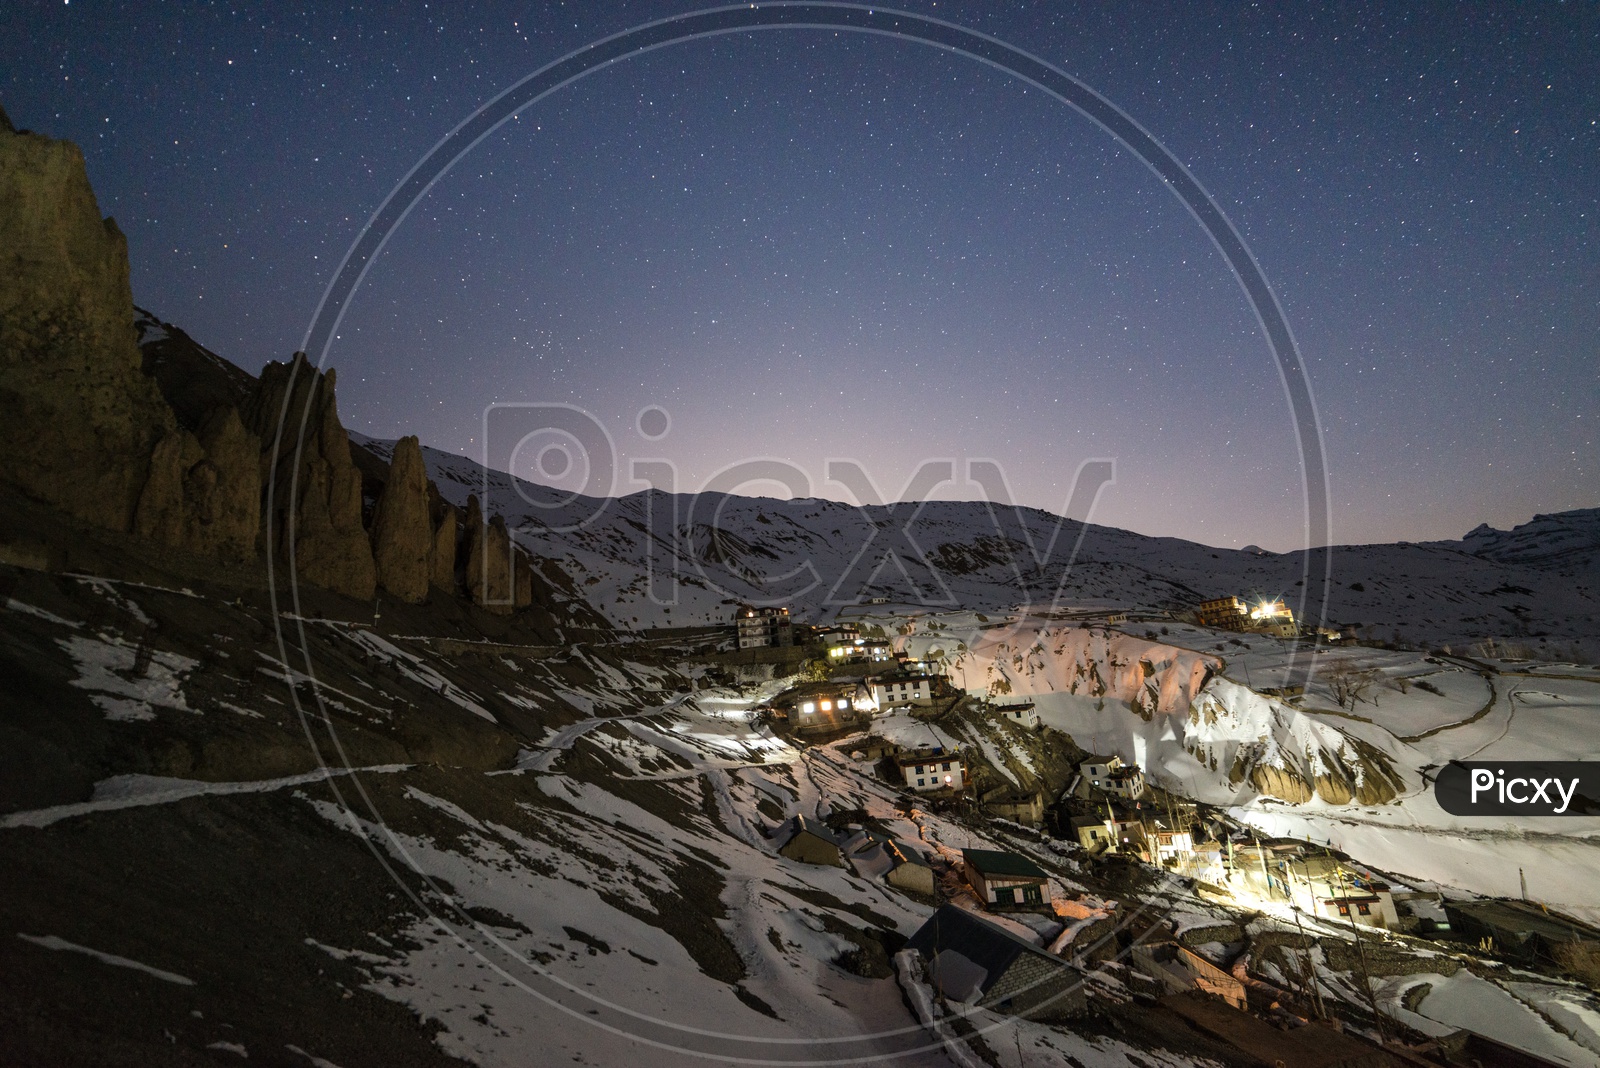 Night View of Spiti Village in Snow with Stars in Sky